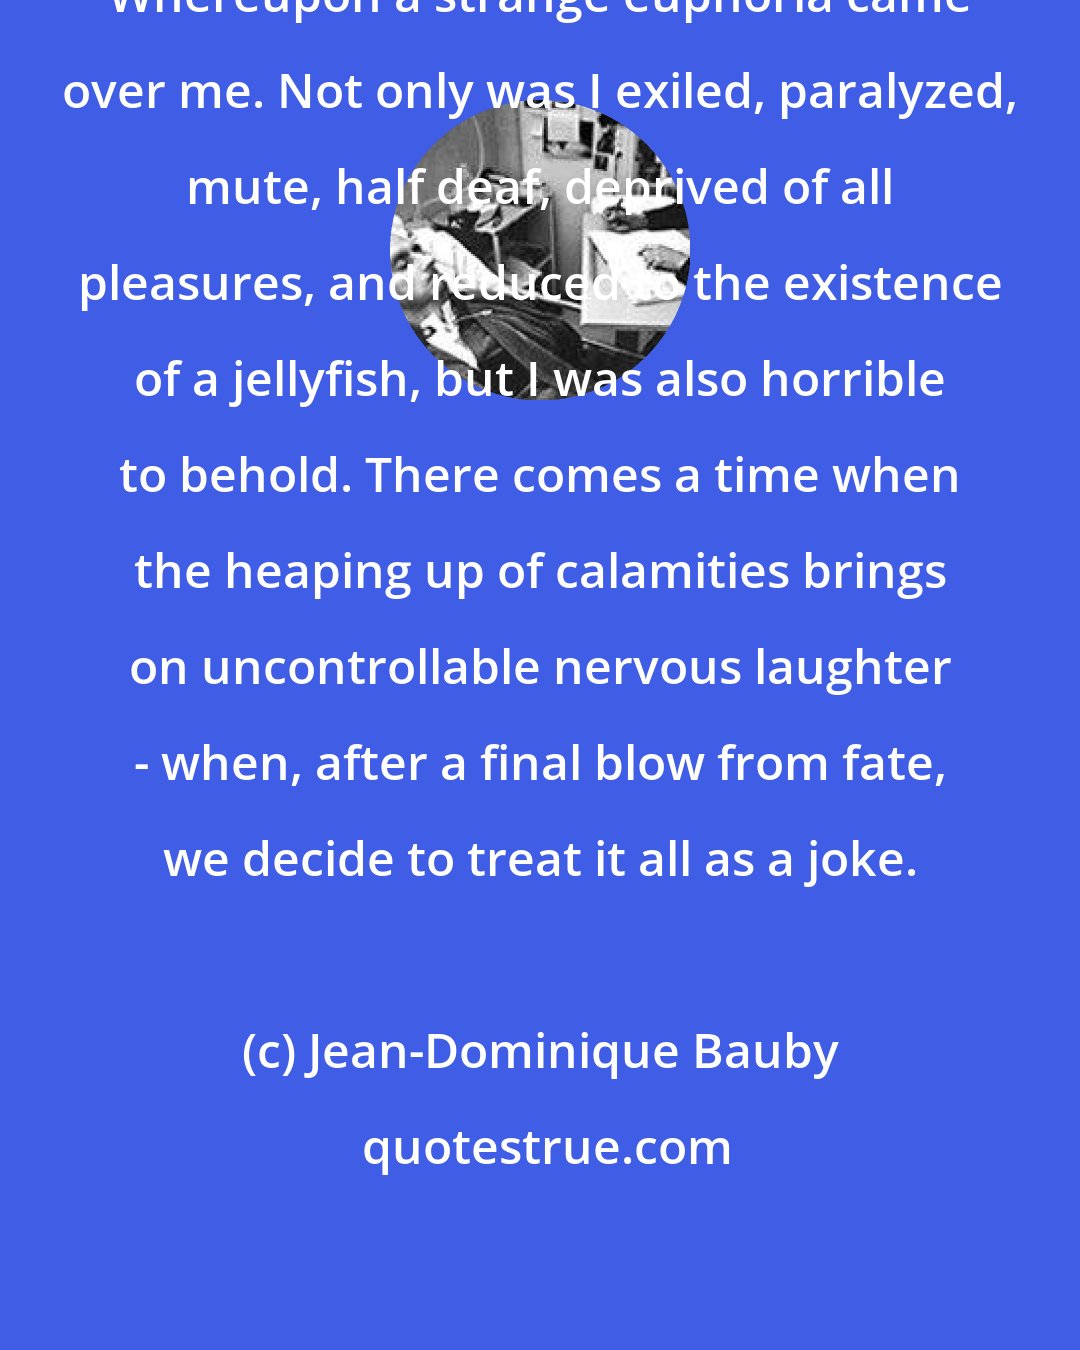 Jean-Dominique Bauby: Whereupon a strange euphoria came over me. Not only was I exiled, paralyzed, mute, half deaf, deprived of all pleasures, and reduced to the existence of a jellyfish, but I was also horrible to behold. There comes a time when the heaping up of calamities brings on uncontrollable nervous laughter - when, after a final blow from fate, we decide to treat it all as a joke.